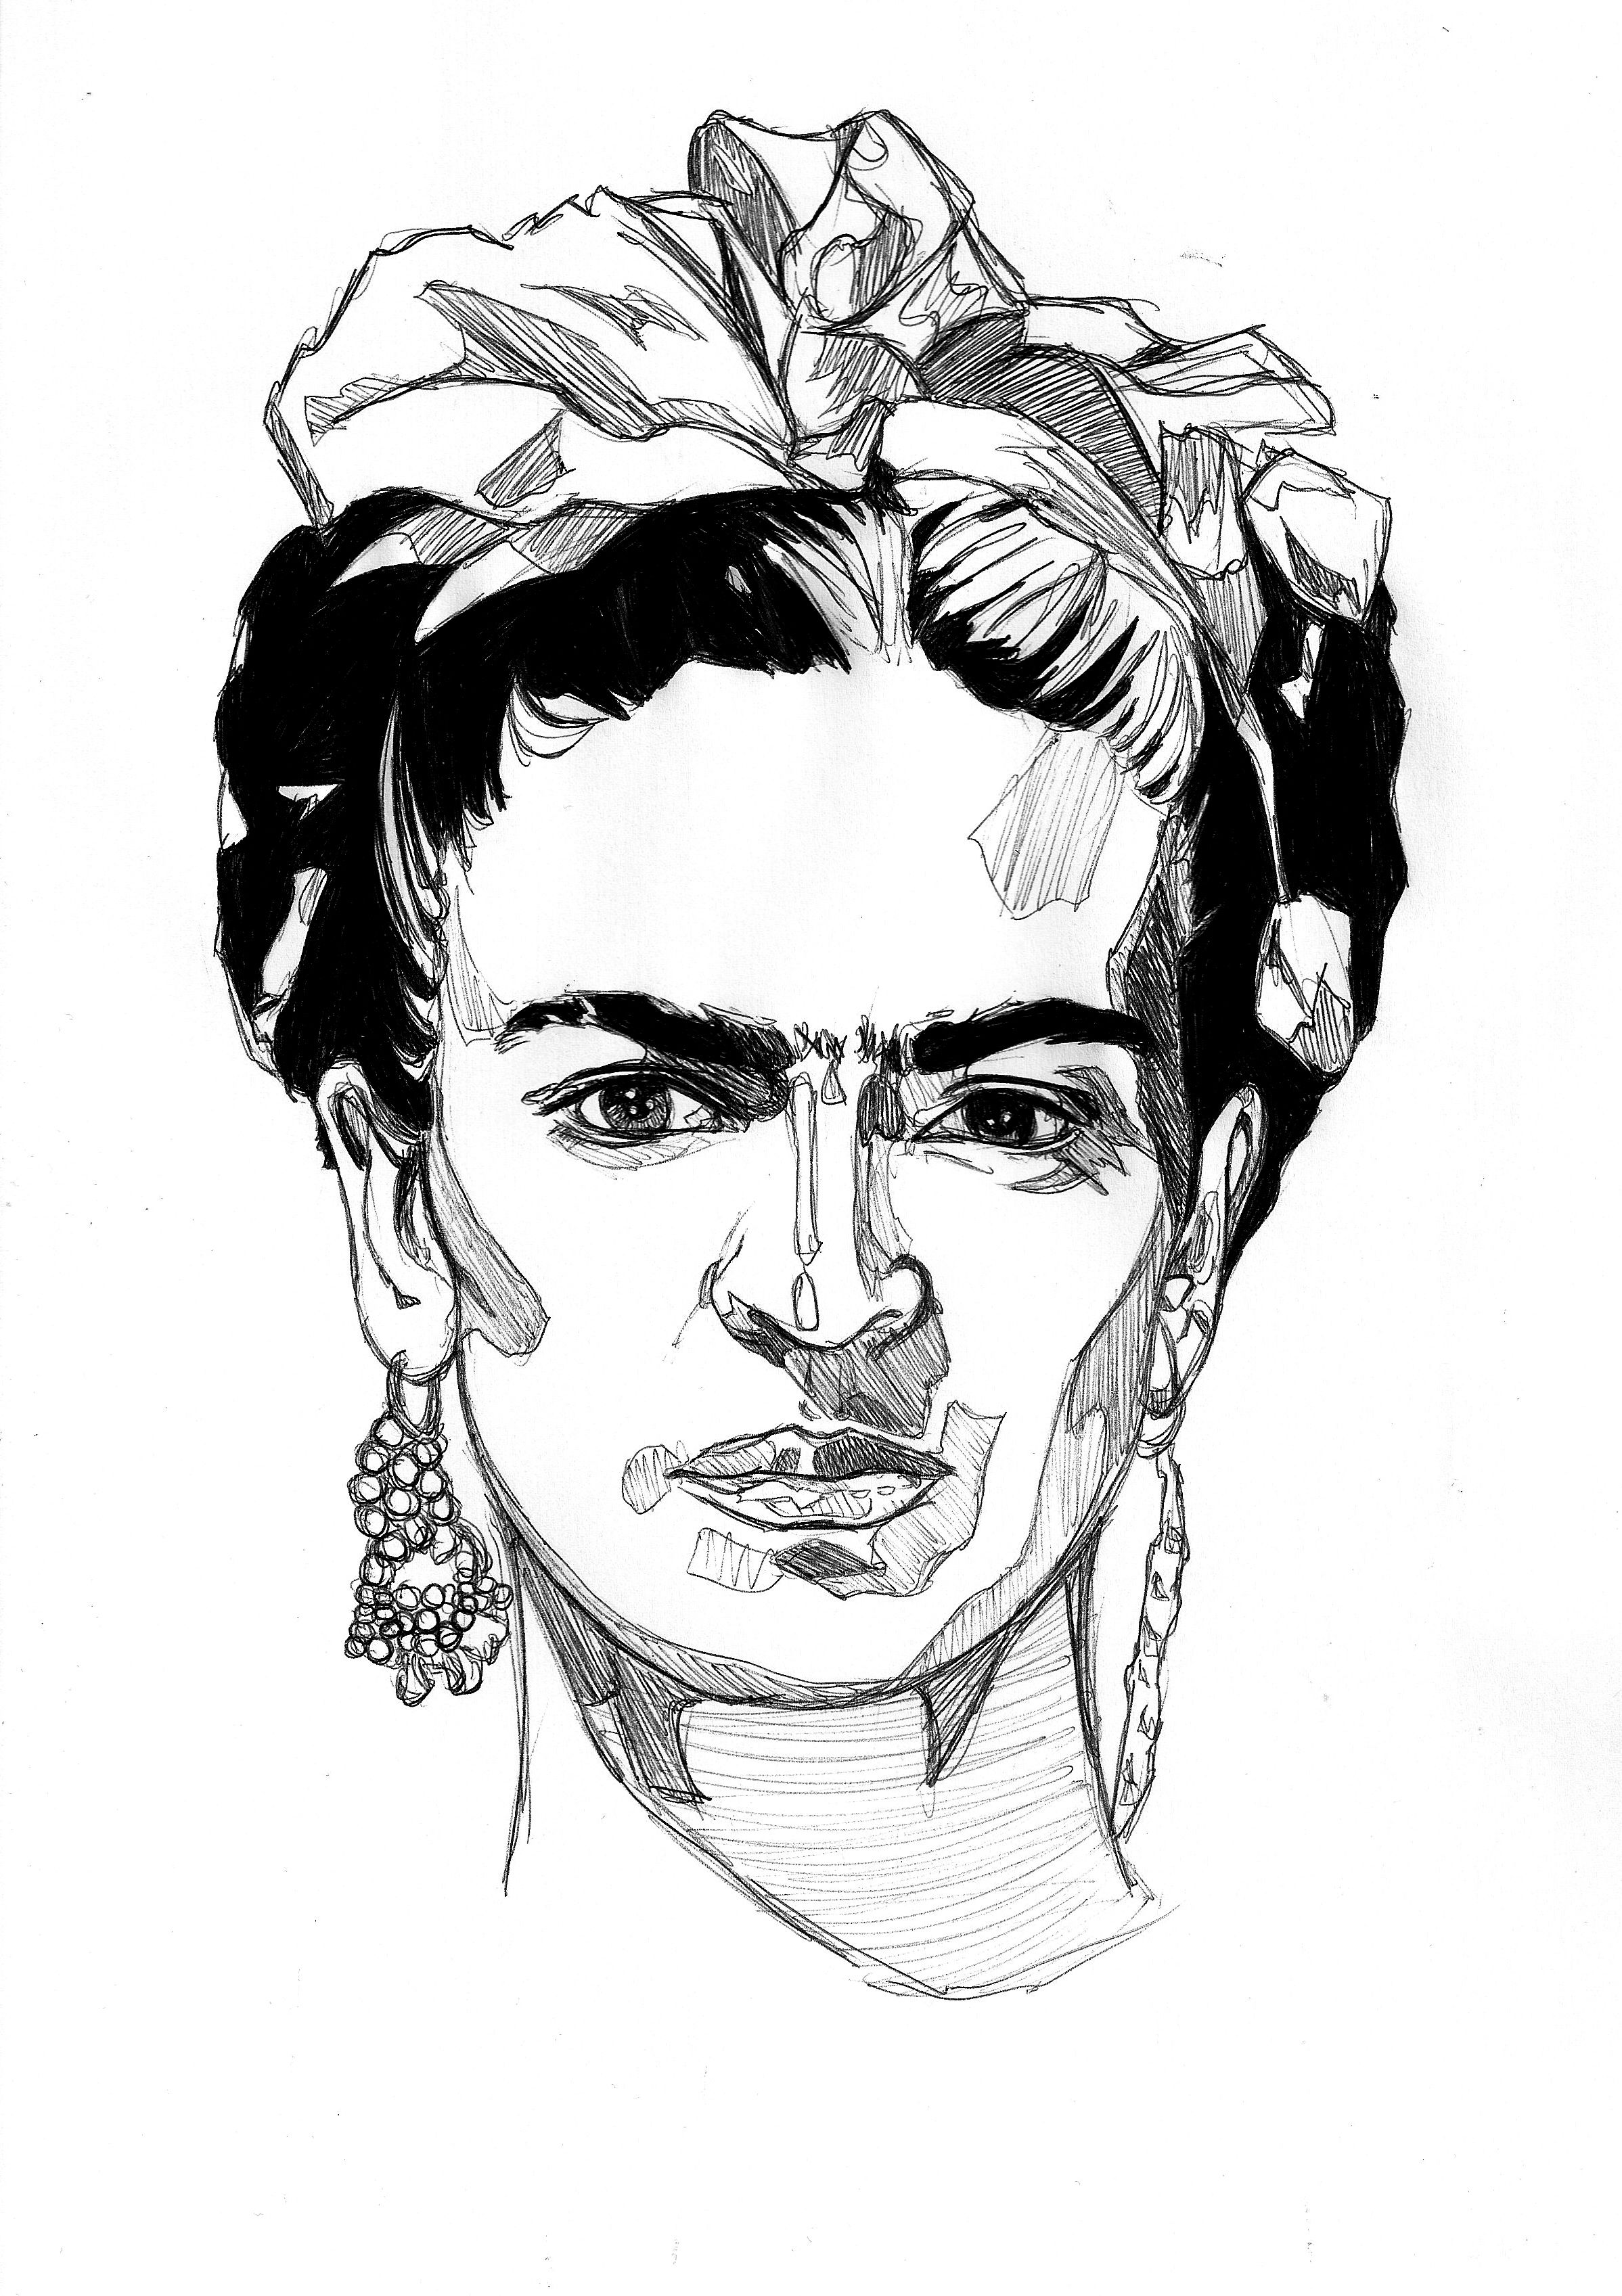 Frida Kahlo Drawings at PaintingValley.com | Explore collection of ...